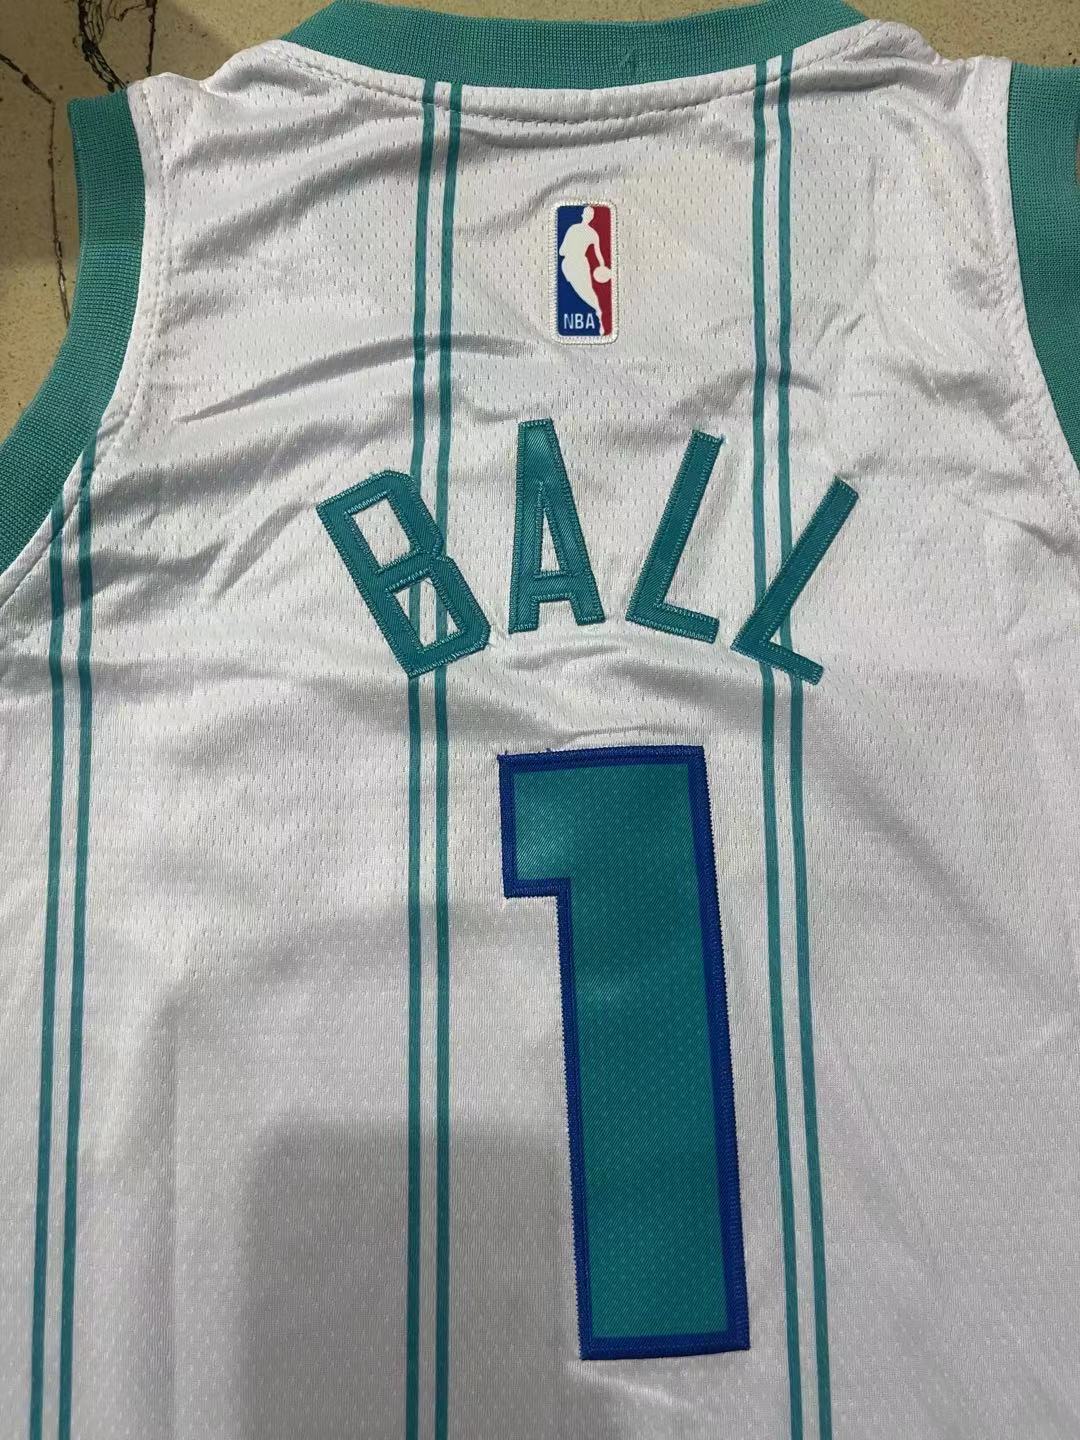 LaMelo Ball YOUTH Charlotte Hornets Jersey – Classic Authentics